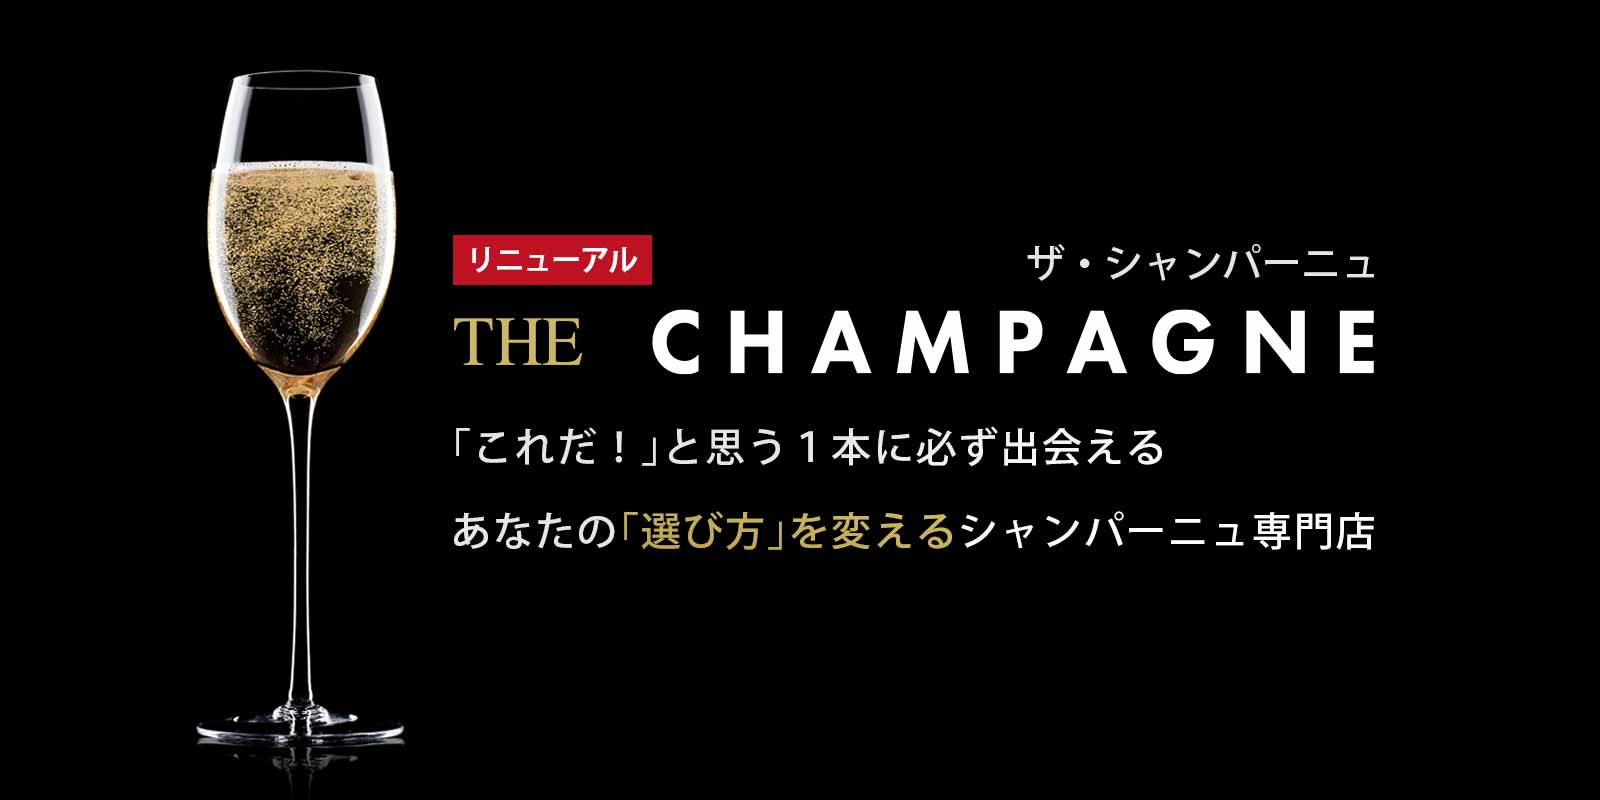 THE CHAMPAGNE